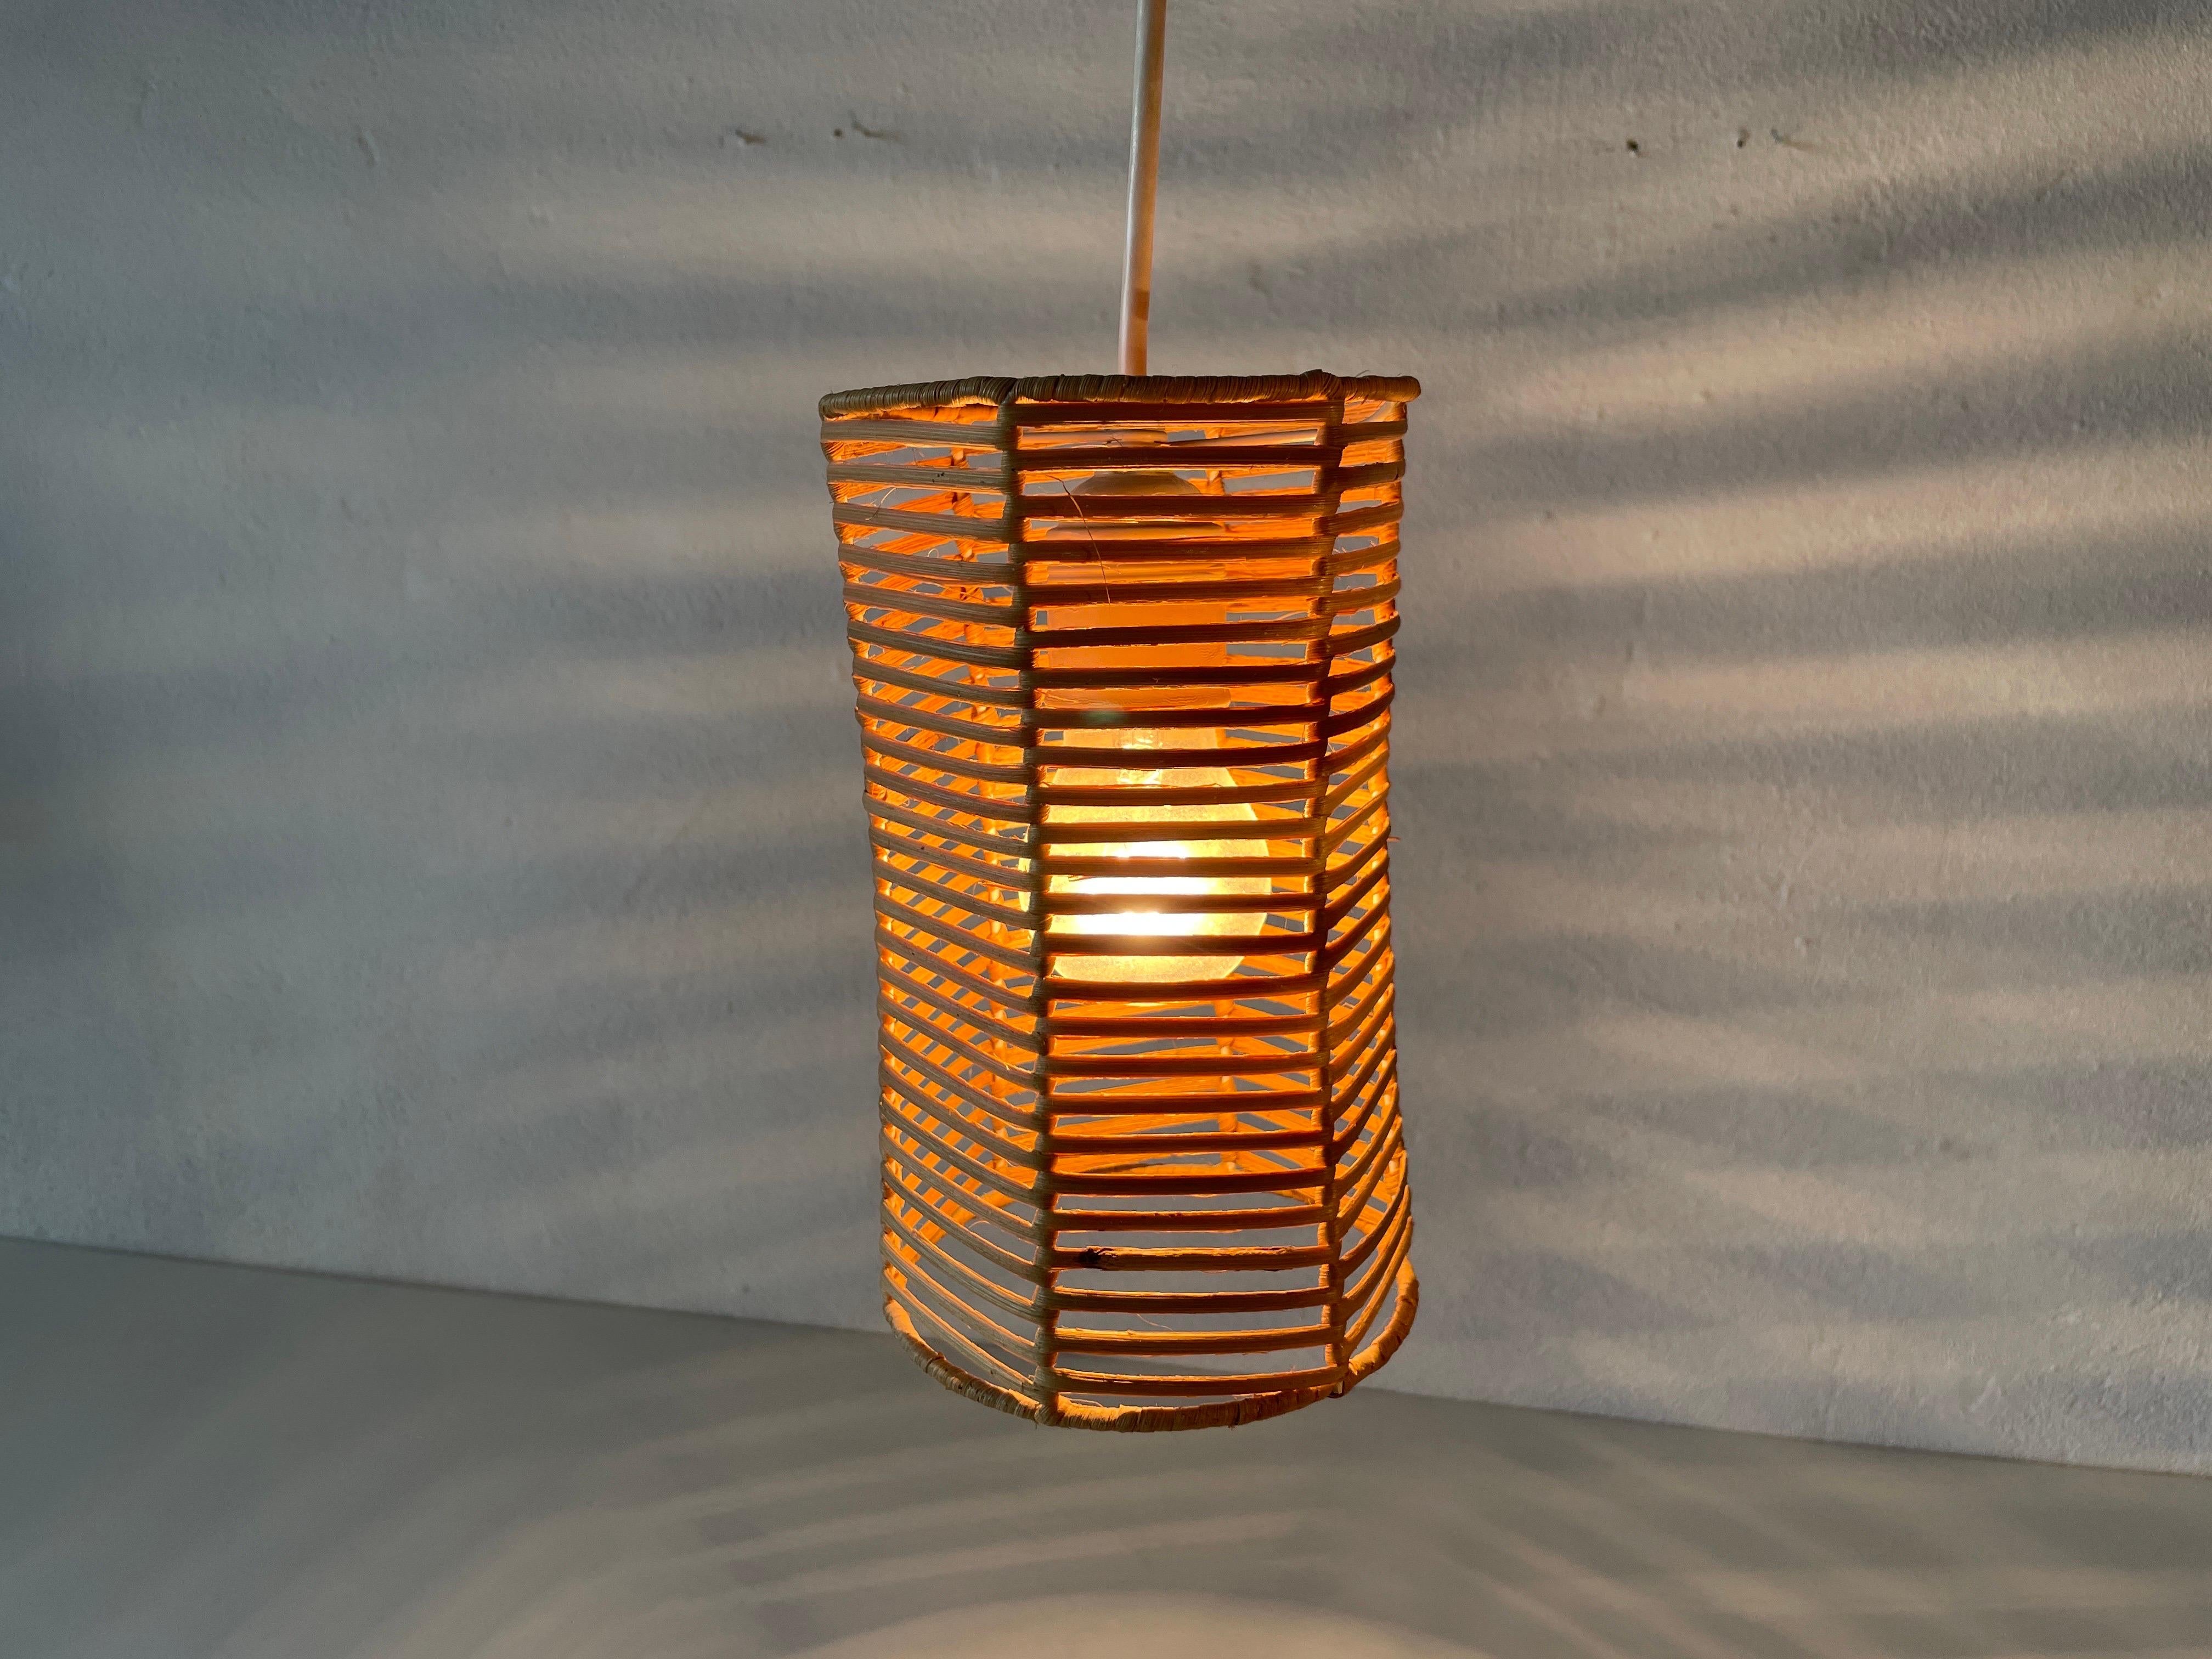 Double Shade Wicker and Wood Pendant Lamp, 1960s, Germany For Sale 9